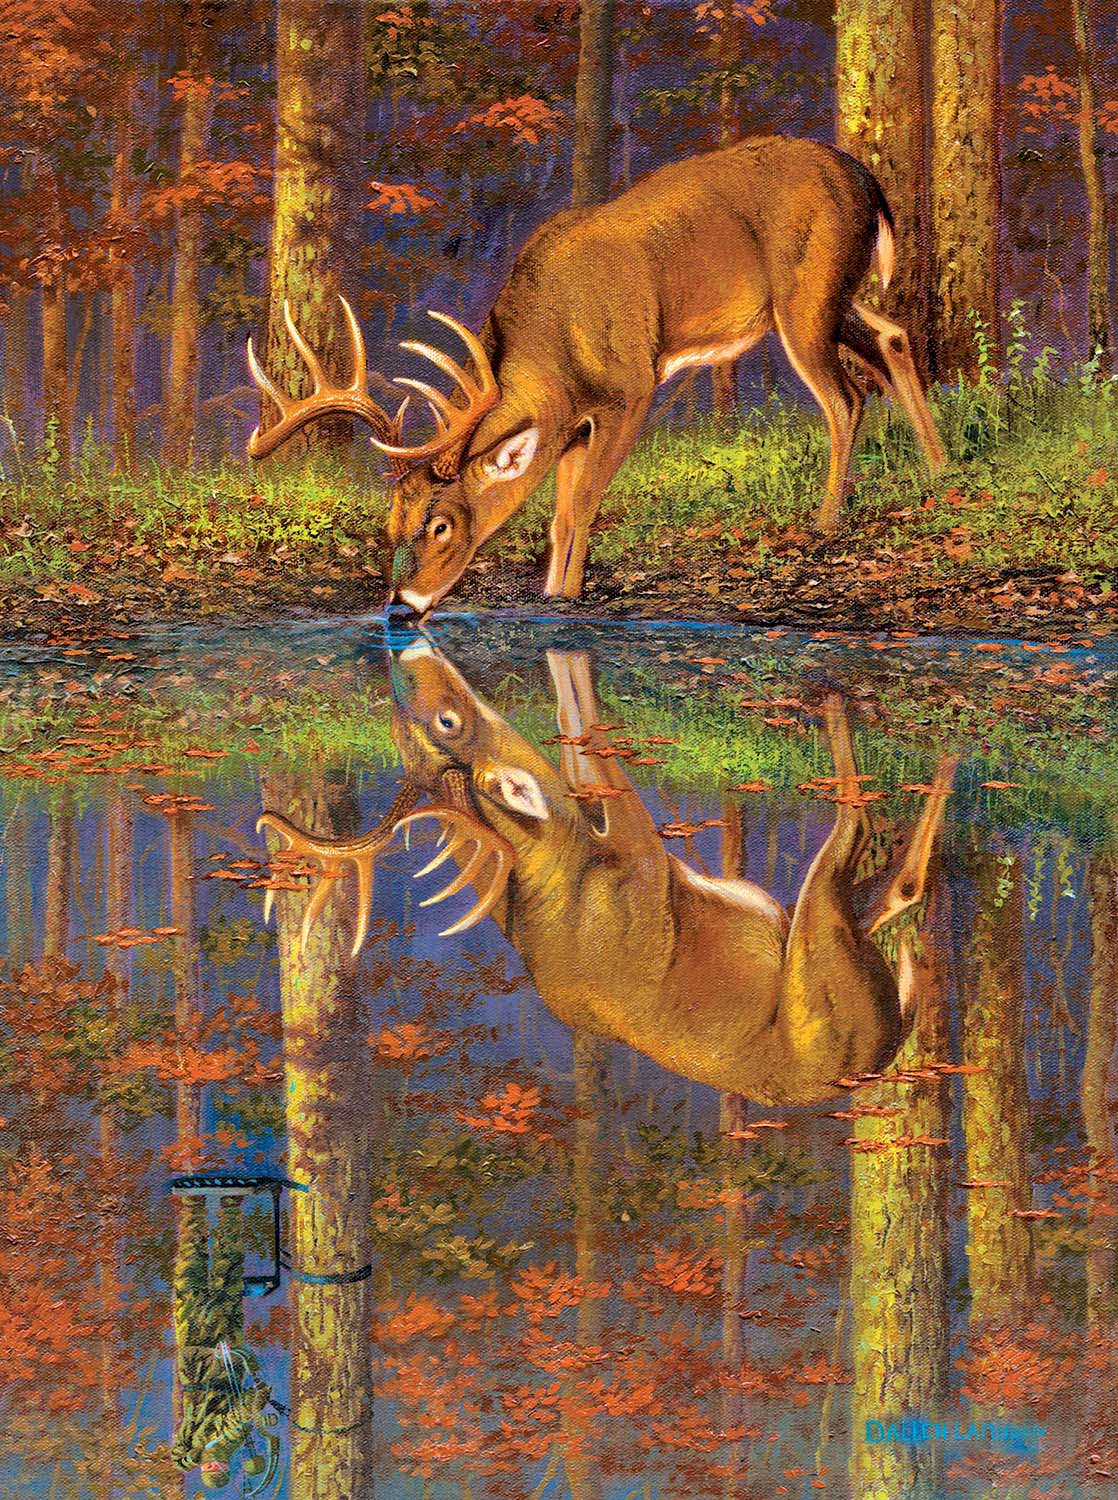 What Lies Below? Forest Animal Jigsaw Puzzle